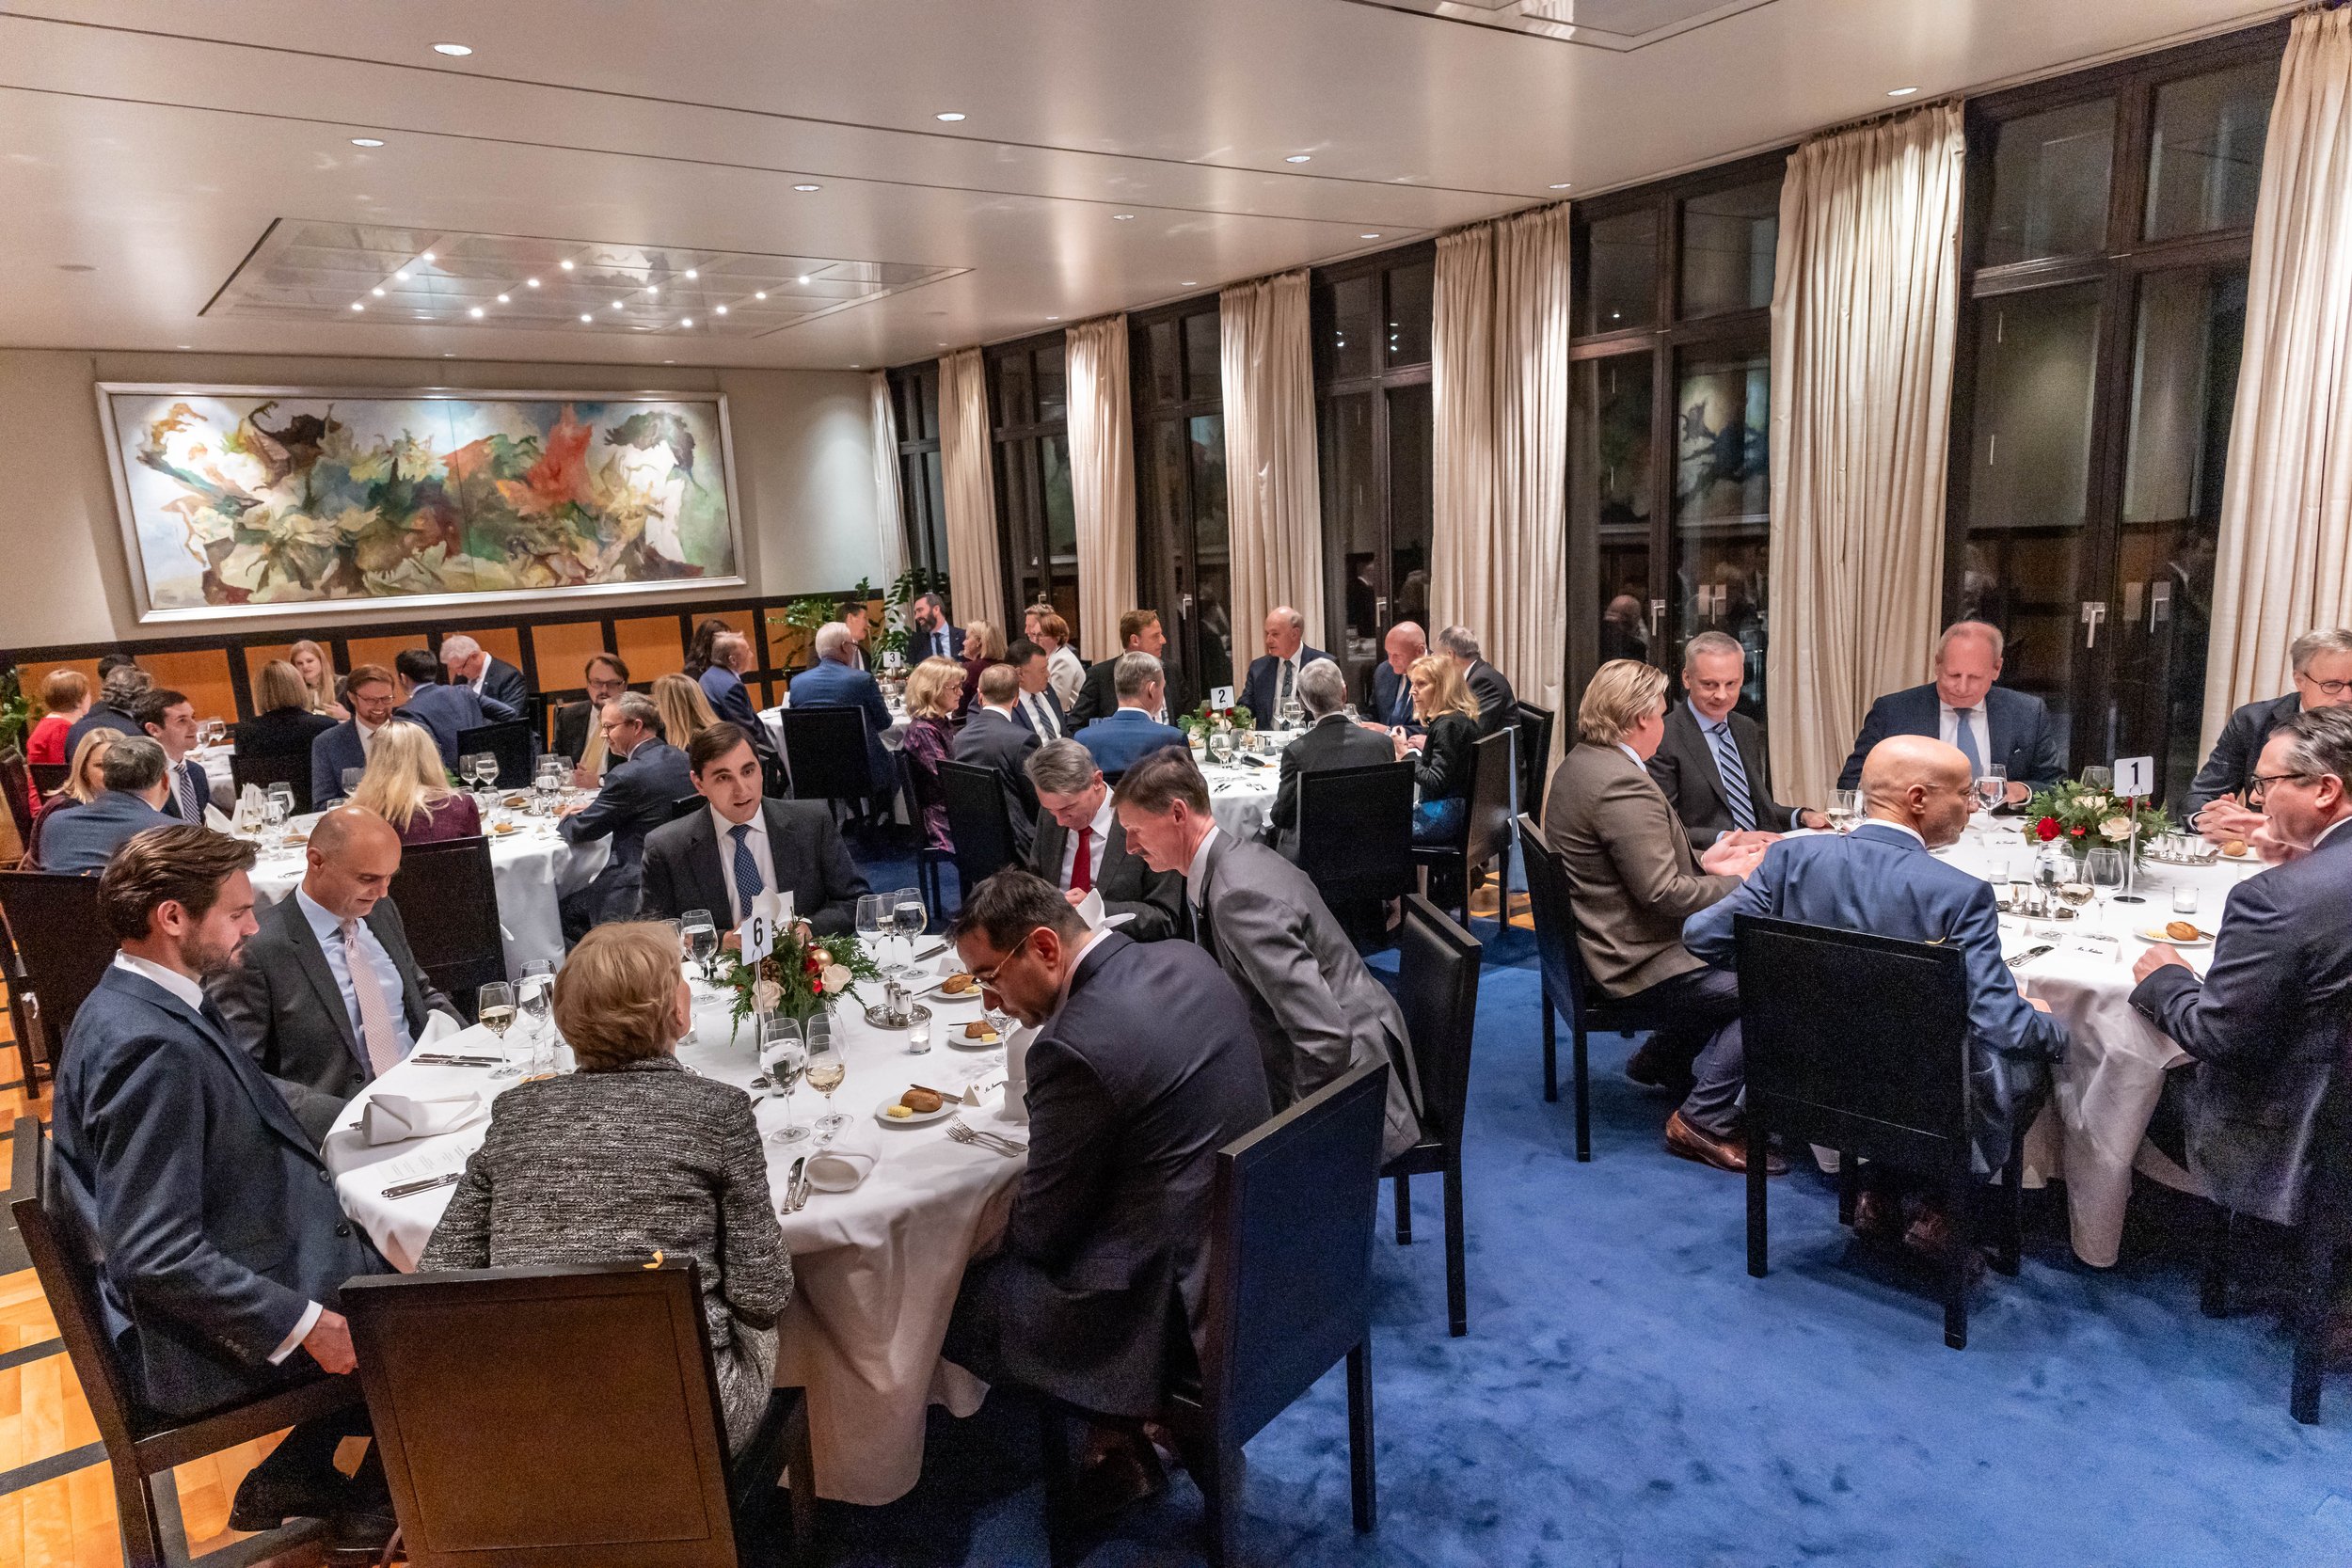 19th Annual GABC Membership Dinner, Hosted by H.E. Andreas Michaelis, Ambassador of Germany to the U.S.